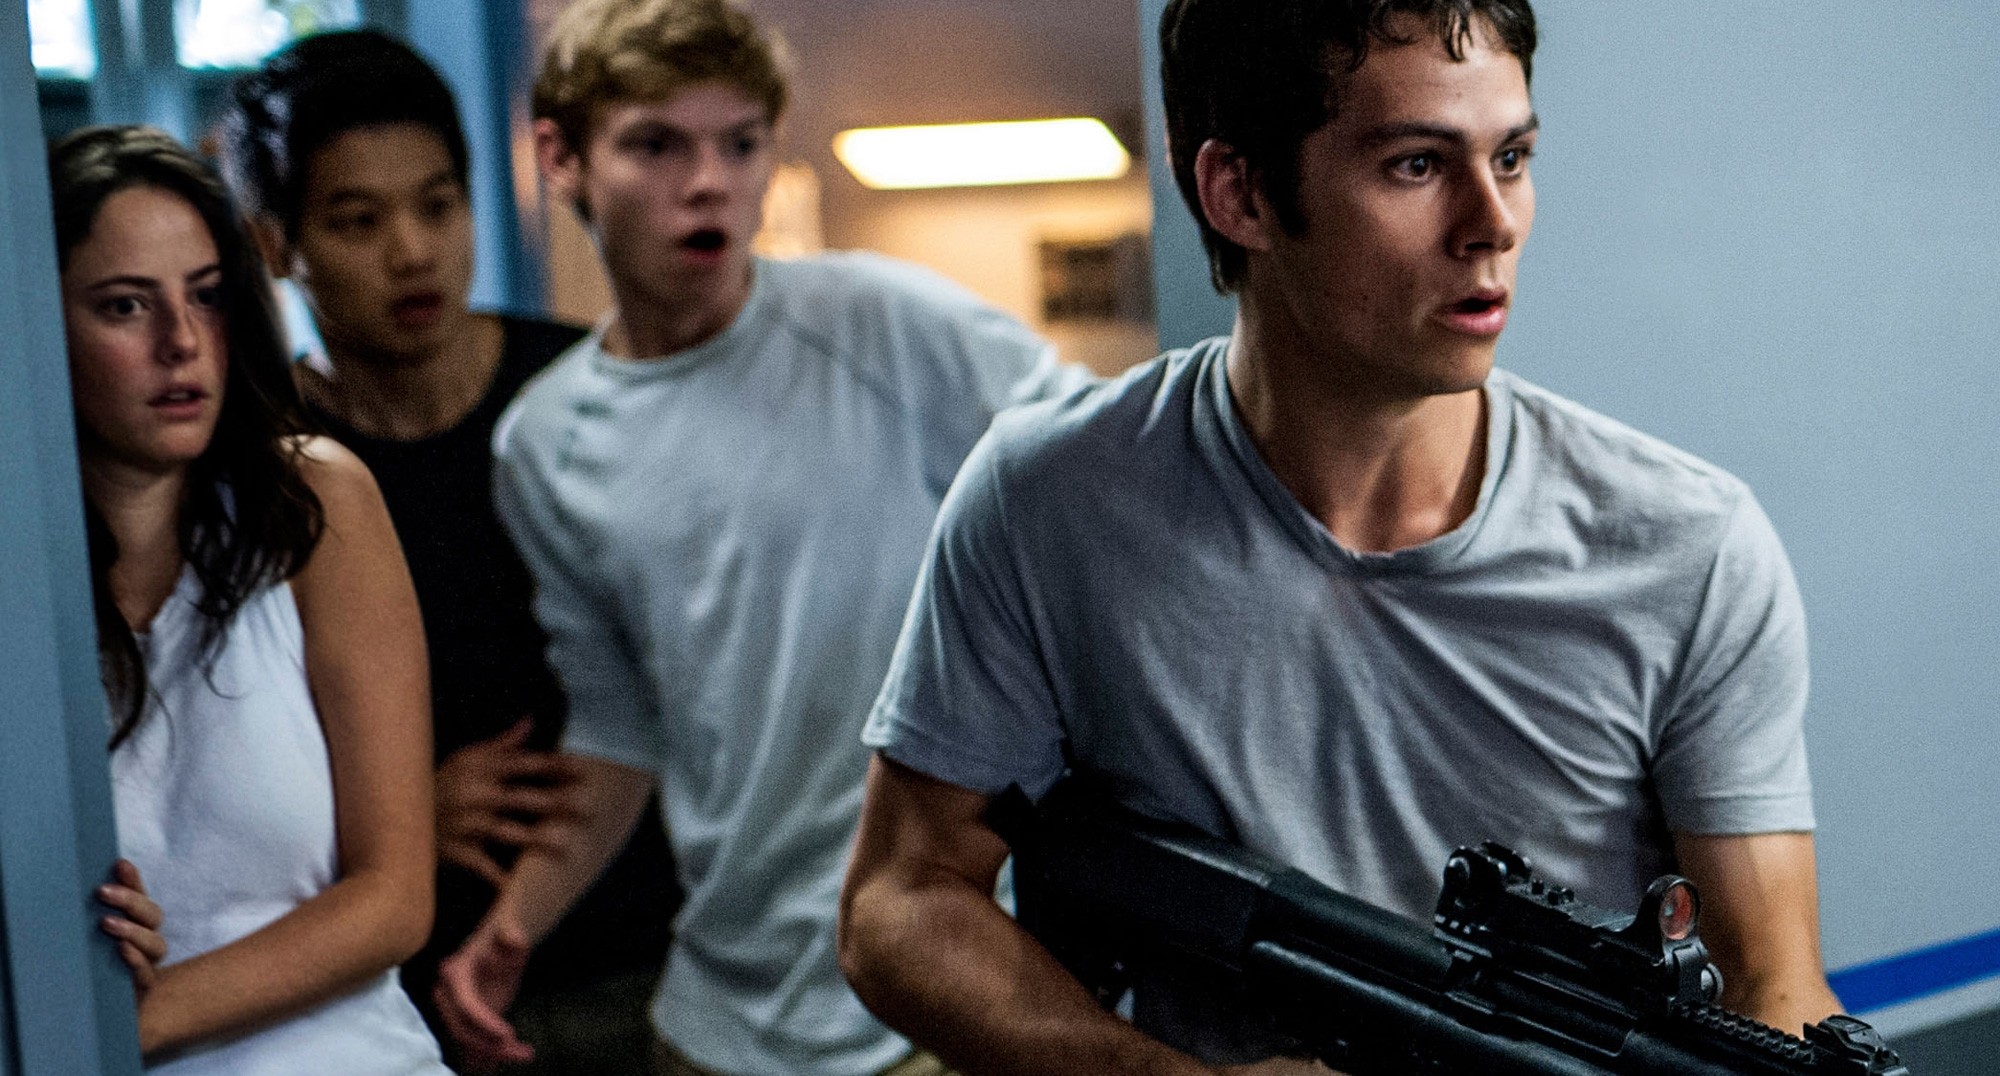 scorchtrials-1-gallery-image.jpg